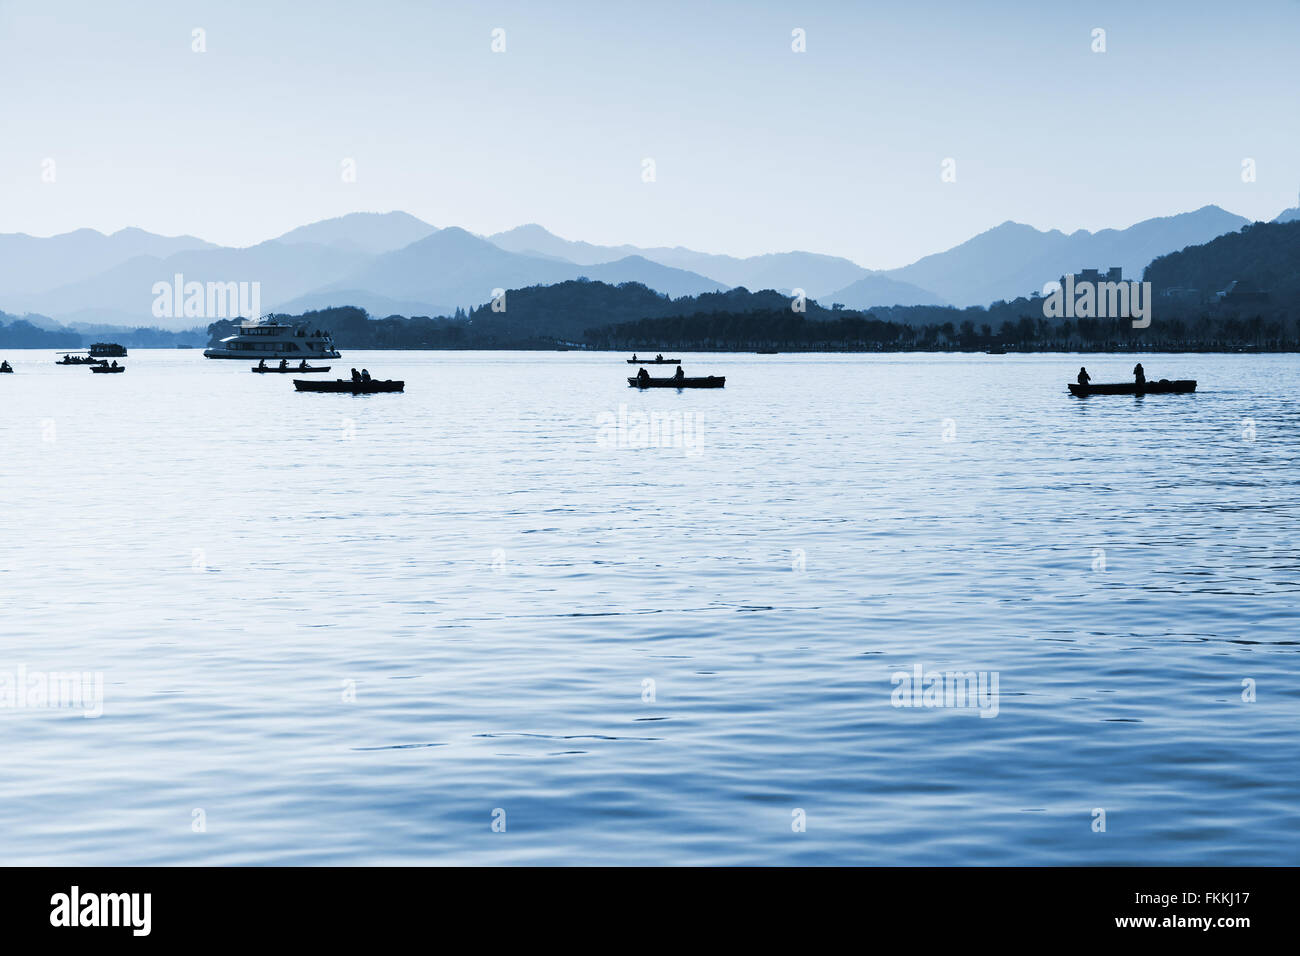 West Lake, panorama with local ordinary people in floating boats, Hangzhou city, China. Blue toned monochrome photo Stock Photo